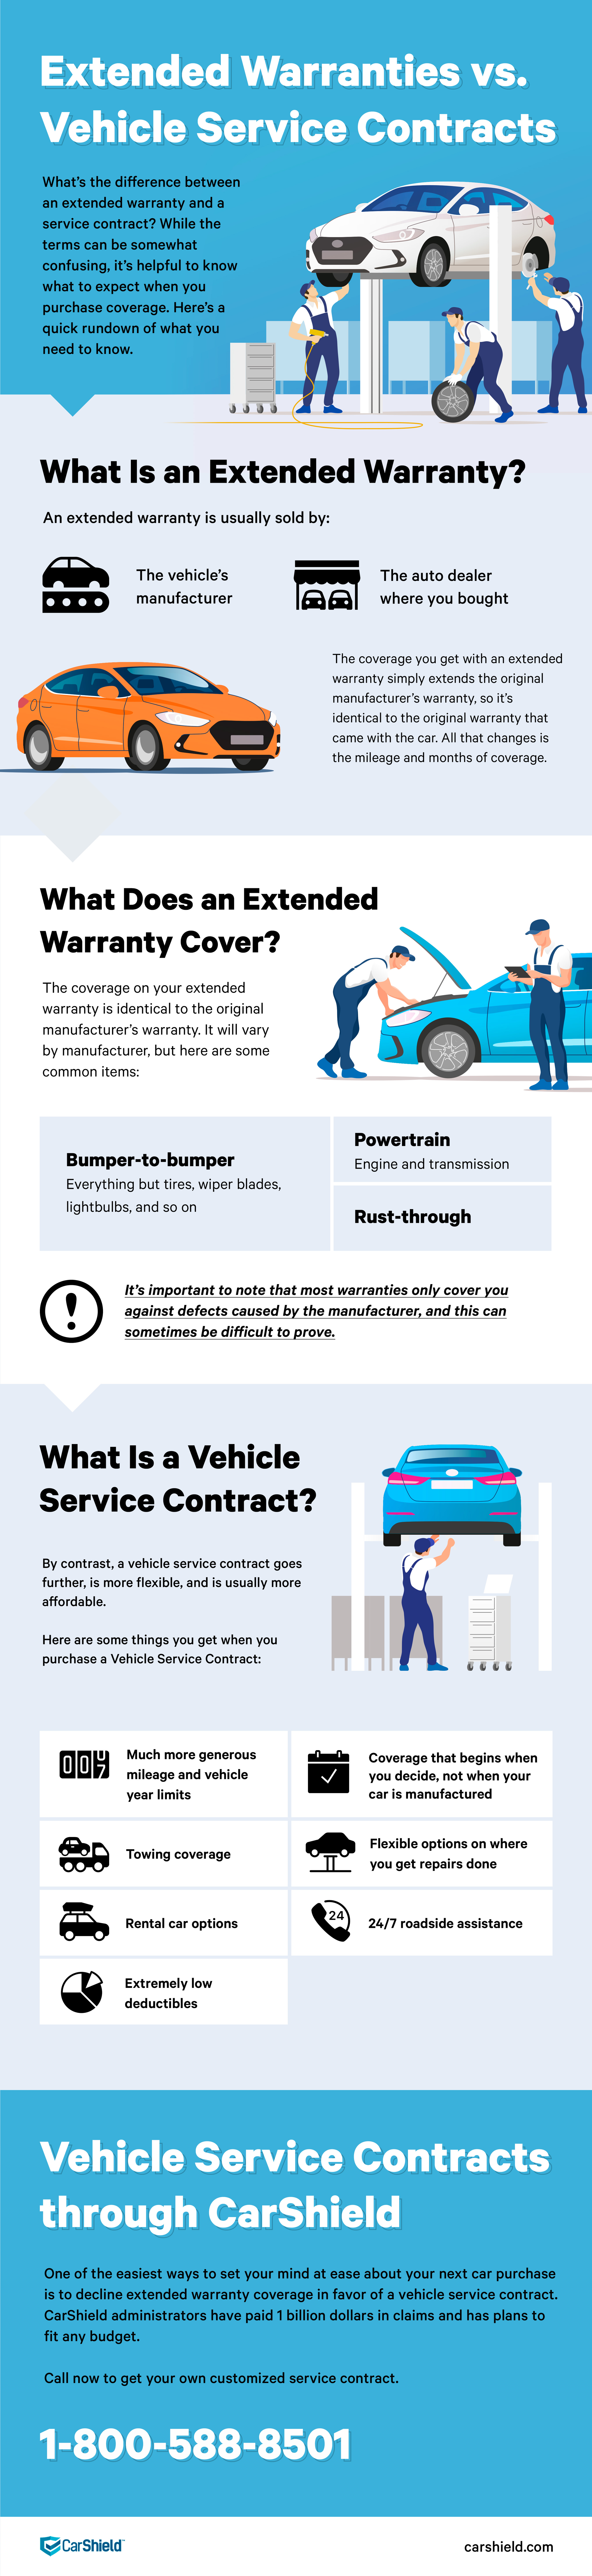 extended warranties vs vehicle service contracts infographic